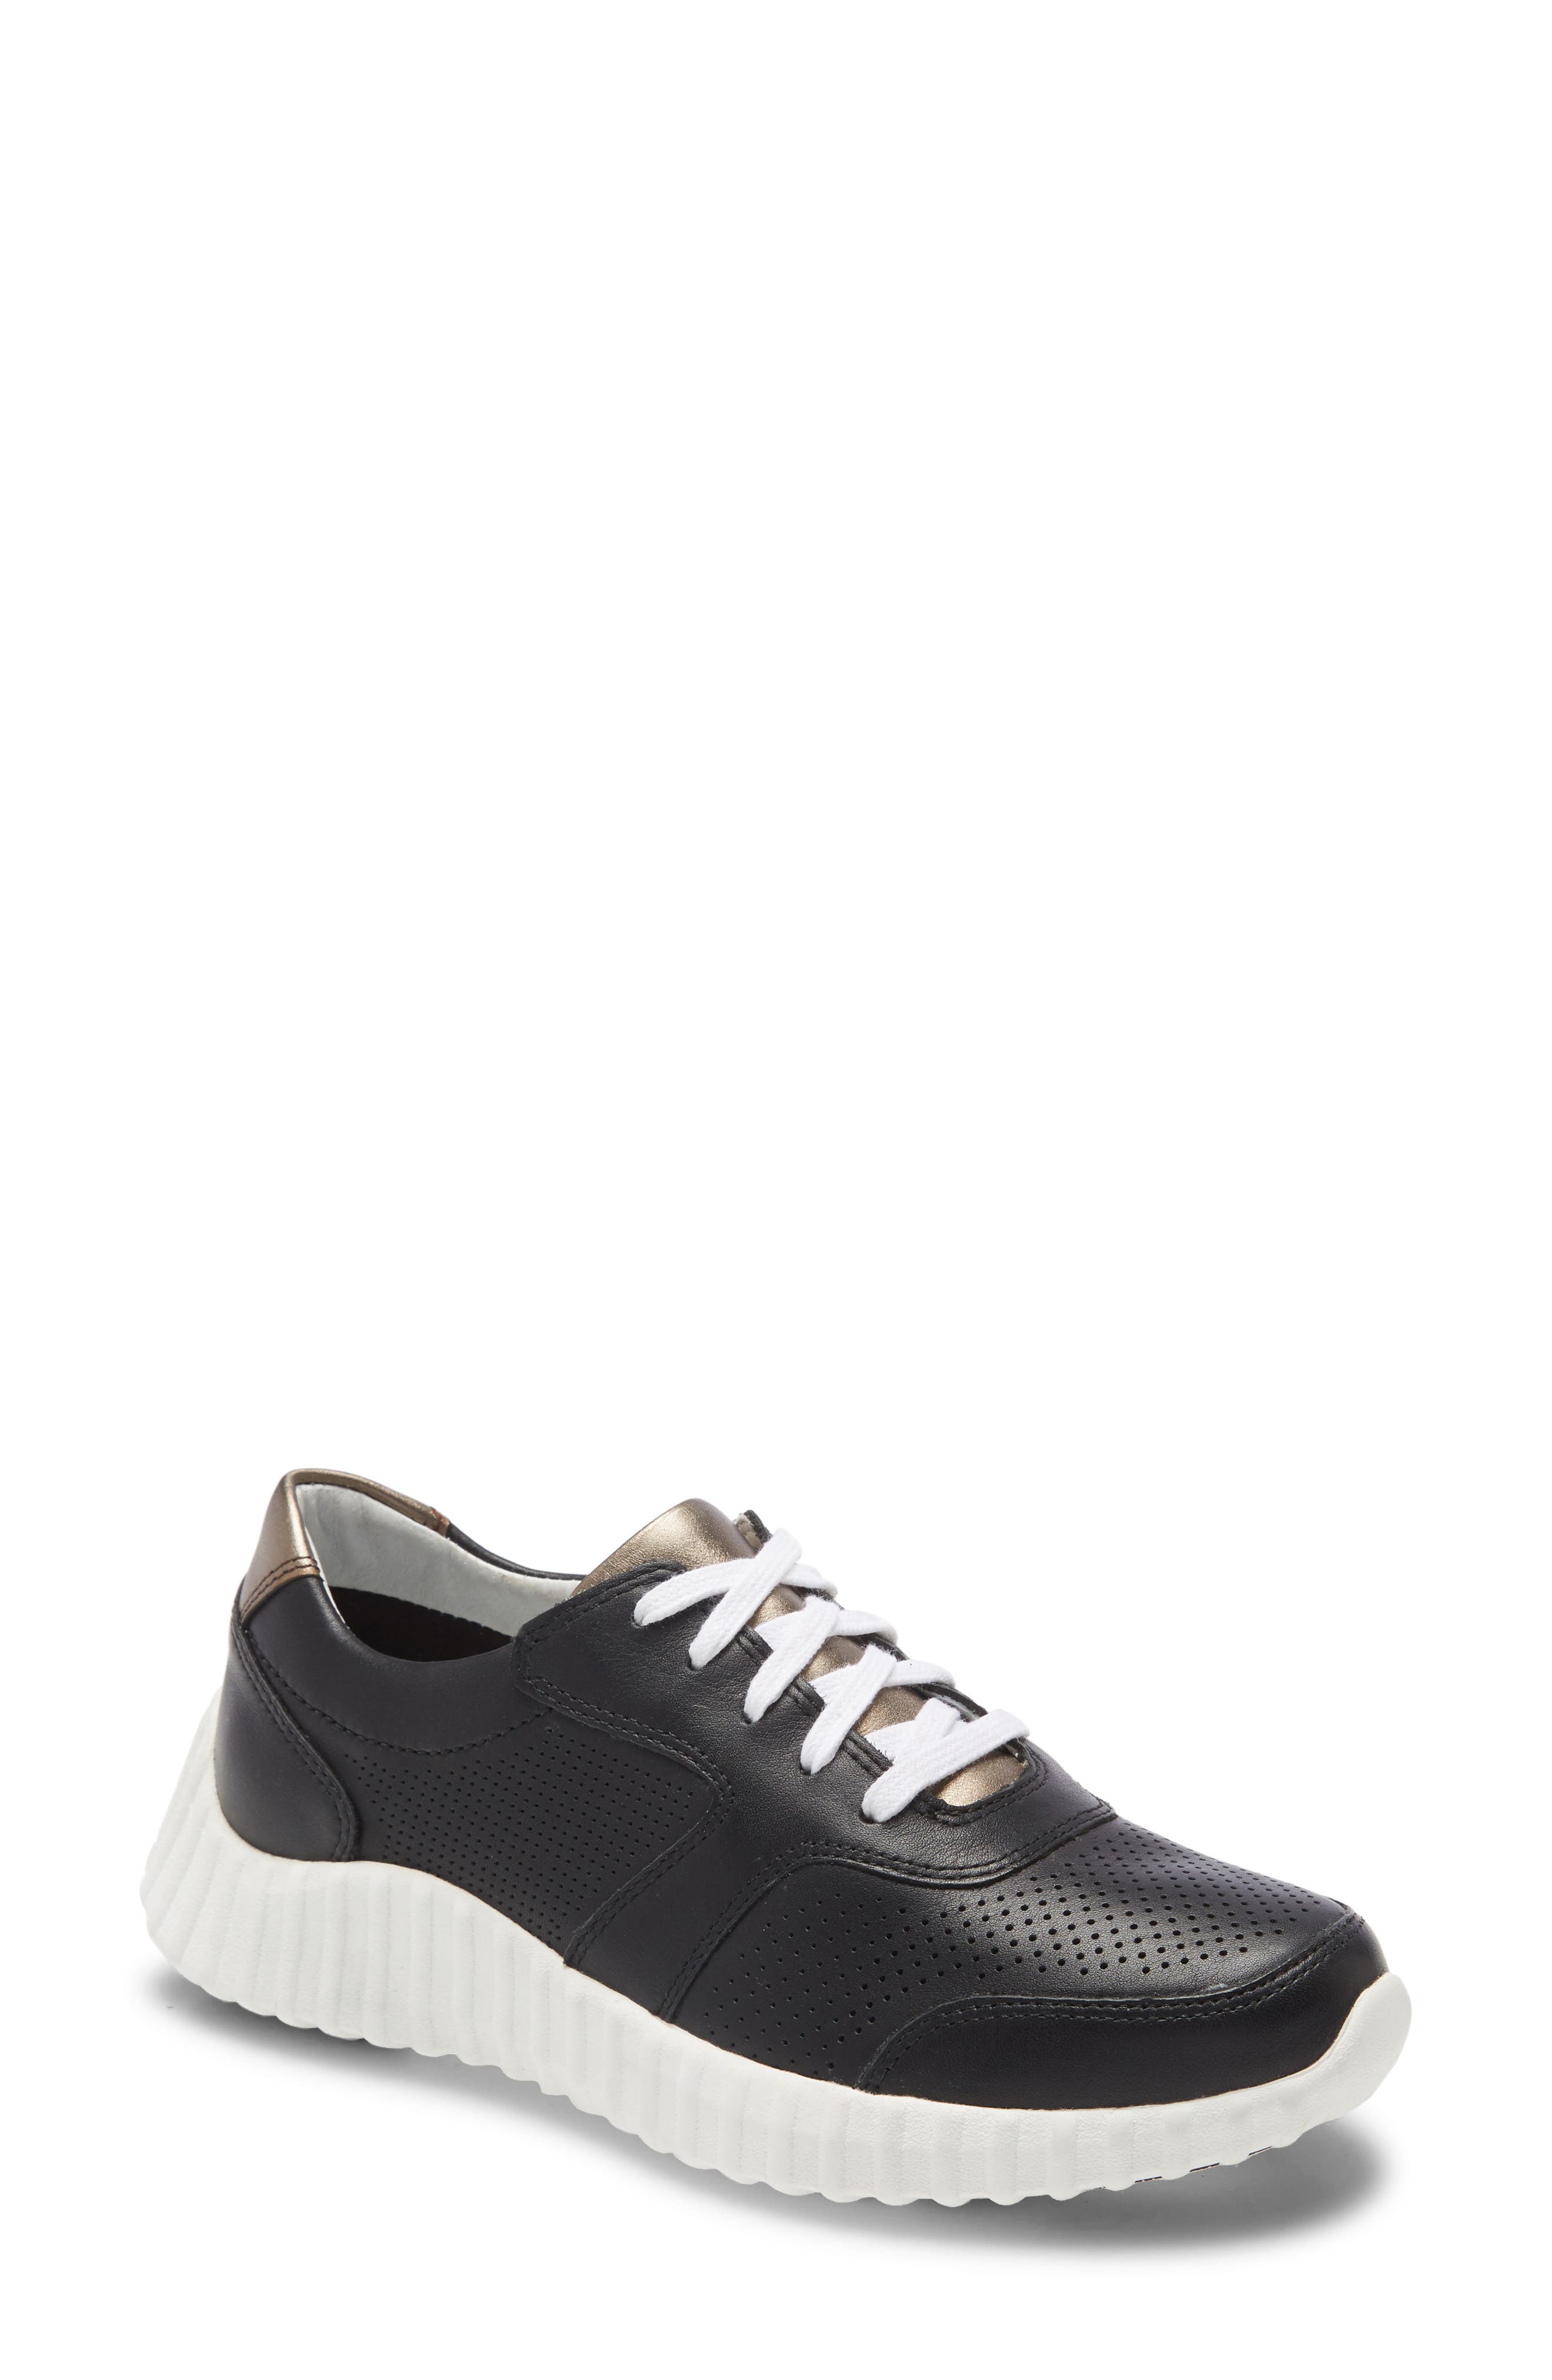 johnston and murphy sneakers womens